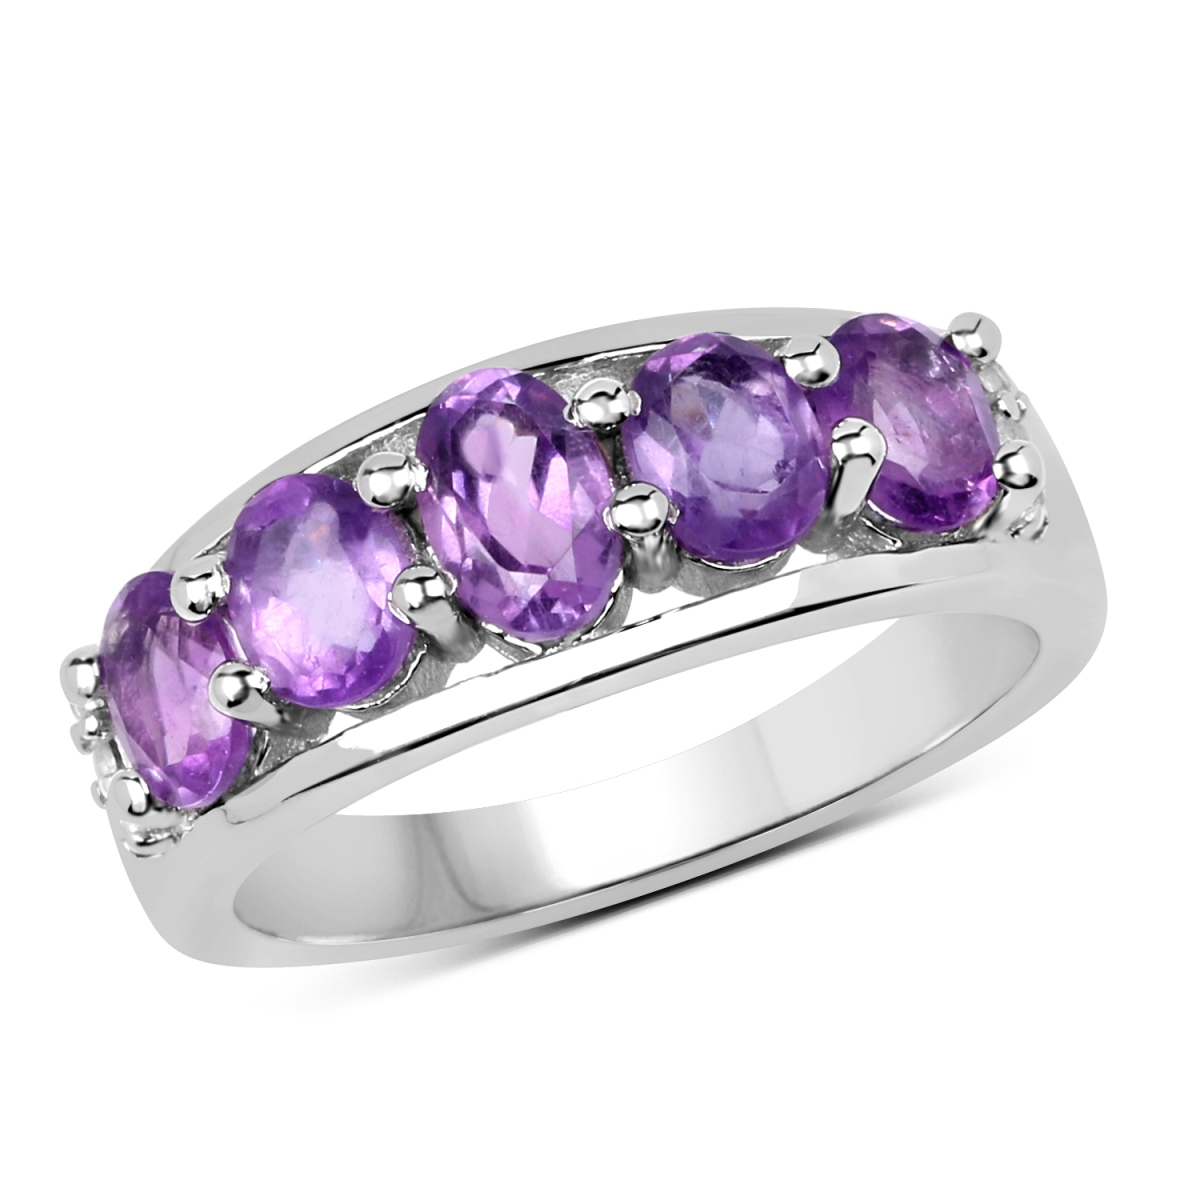 Picture of HauteFacets QR19099AWT-SSR-6 1.85 Carat Sterling Silver Oval Ring with Two Gems Stone  Purple - Size 6